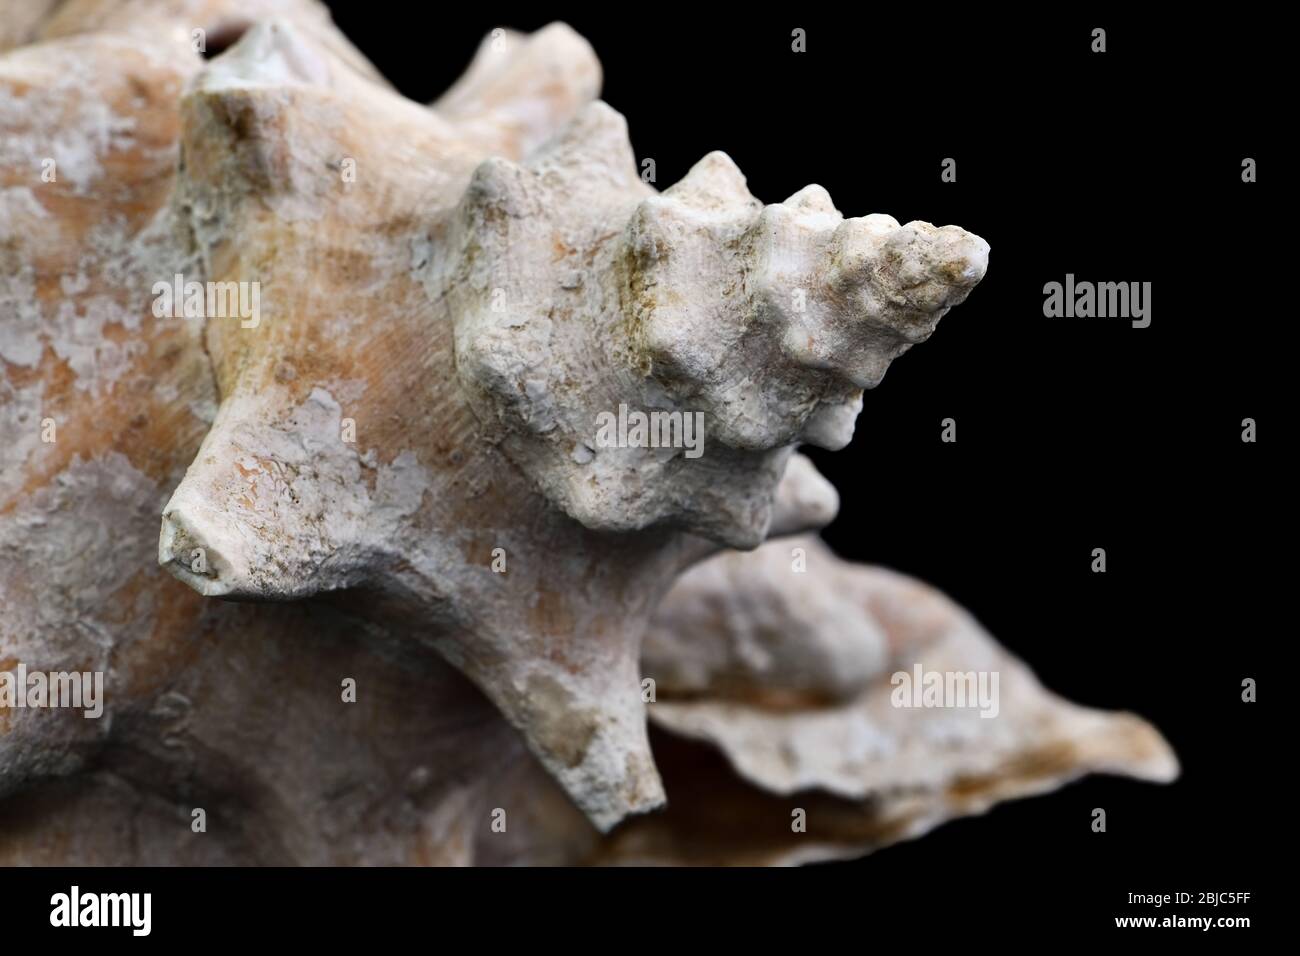 Tropical seashell isolated on black background. Caribbean queen conch in closeup macro photography. Stock Photo